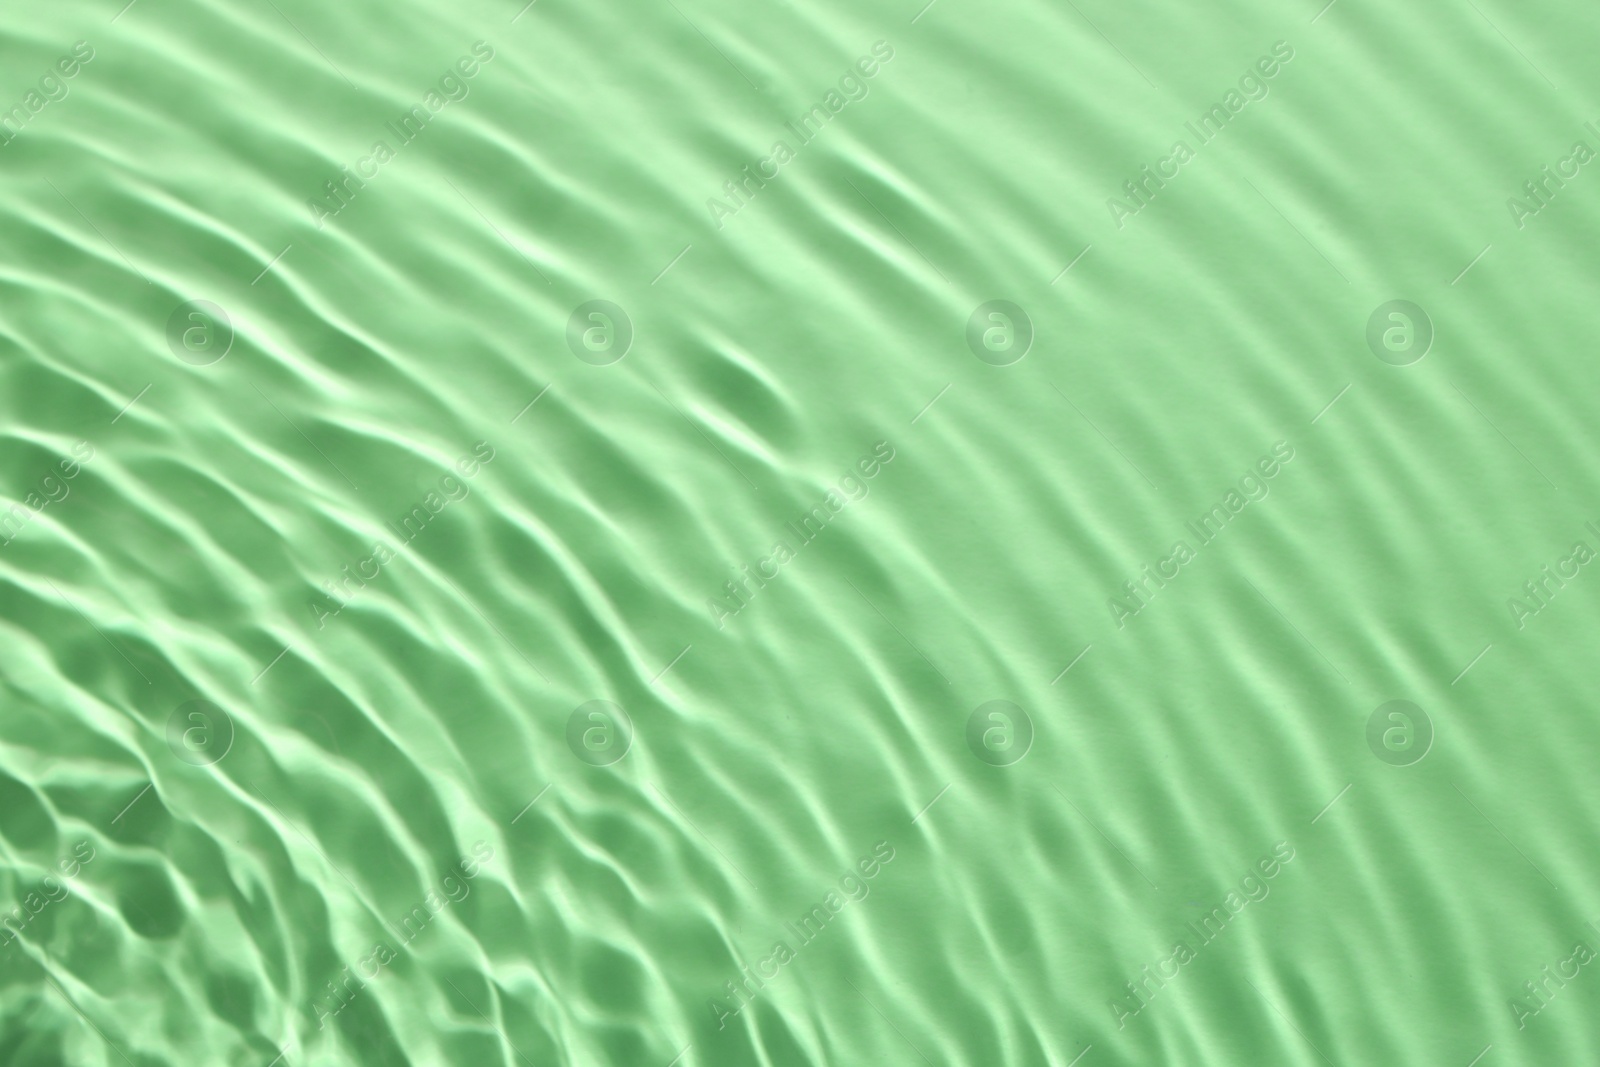 Image of Rippled surface of clear water on green background, closeup